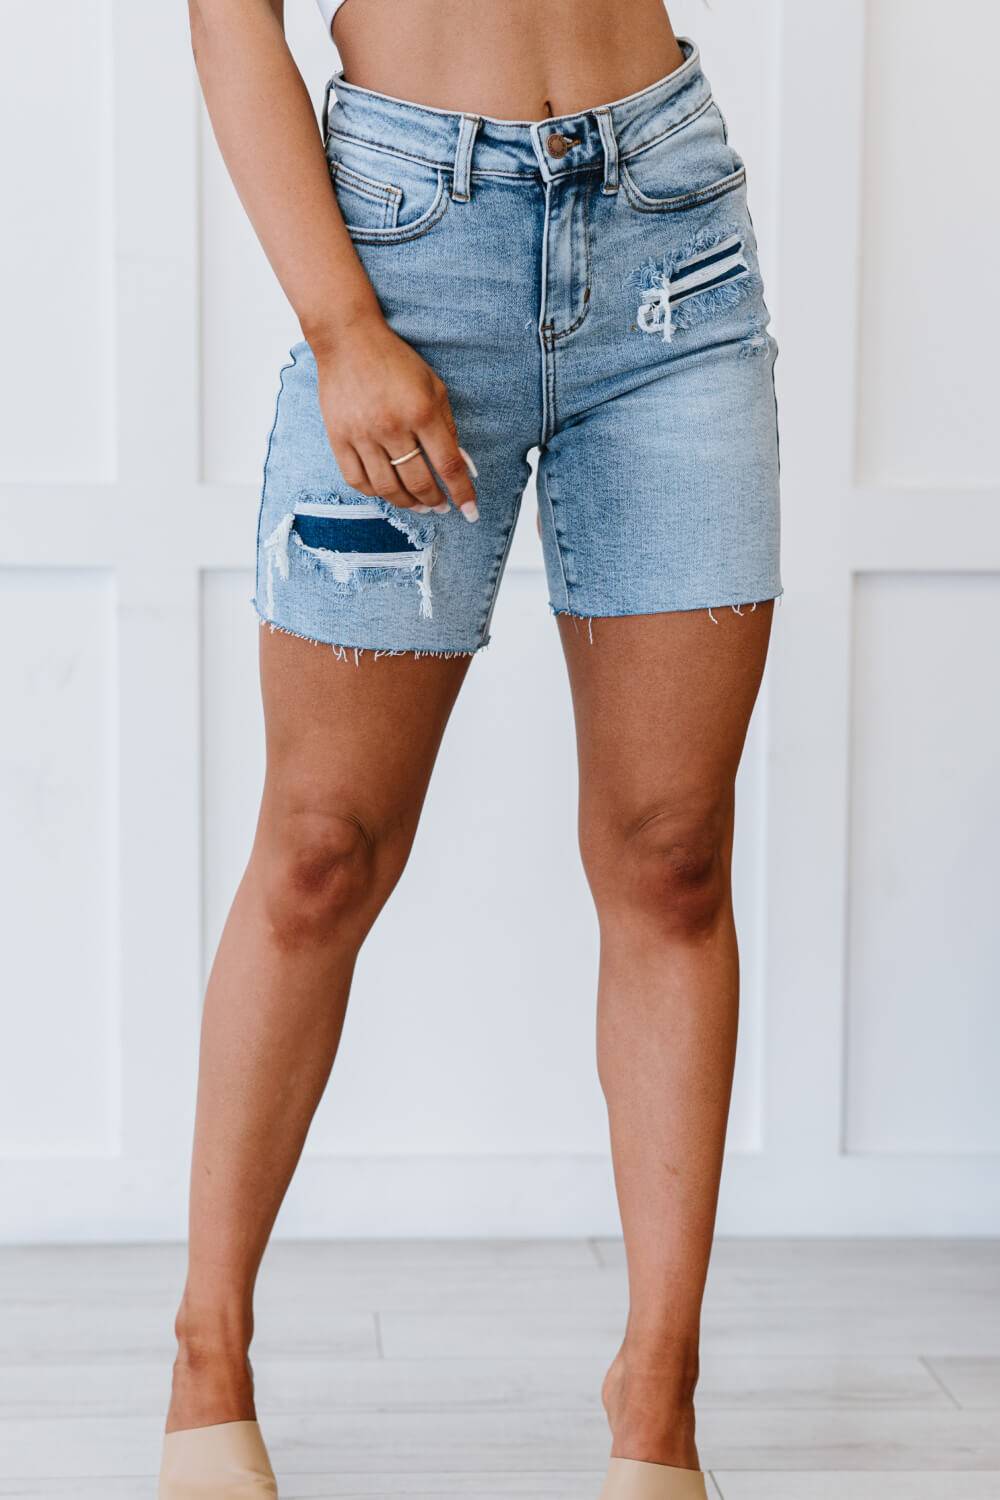 Judy Blue, Acid Wash Denim Patch High Rise Mid Thigh Shorts. Style Number 150094